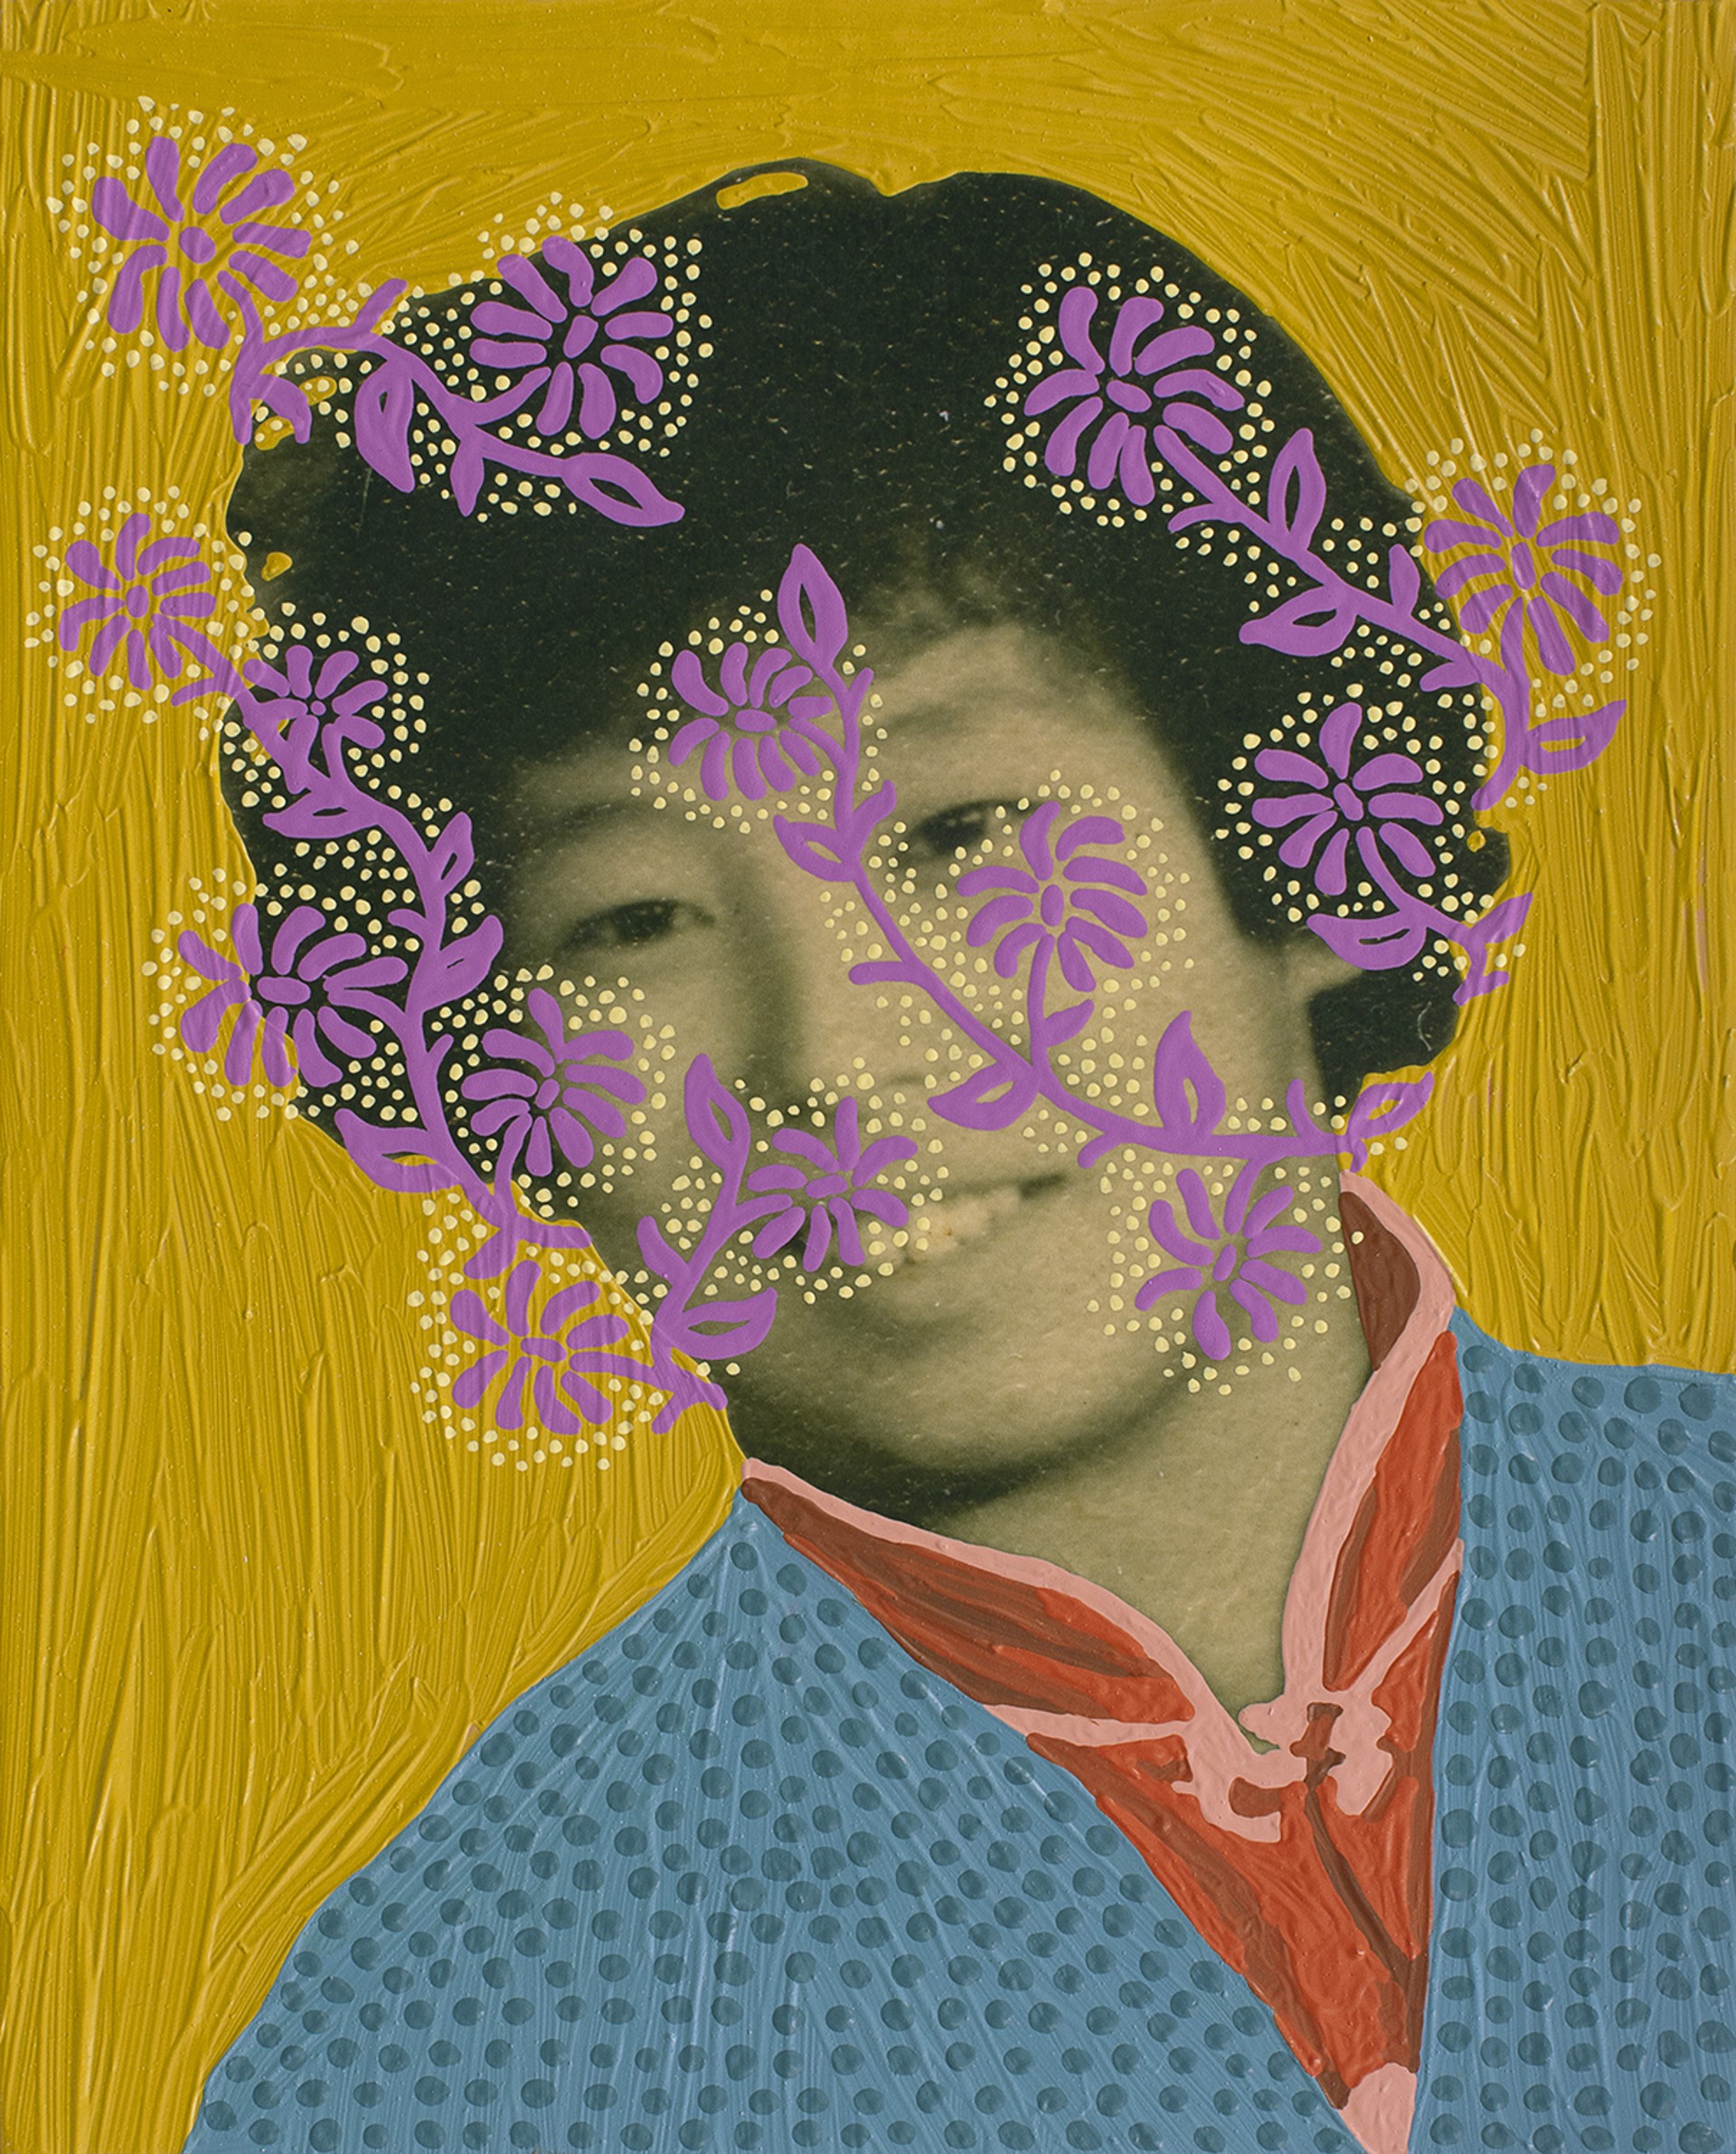 Untitled (Woman with Mustard Background and Dotted Purple Flowers) by Daisy Patton